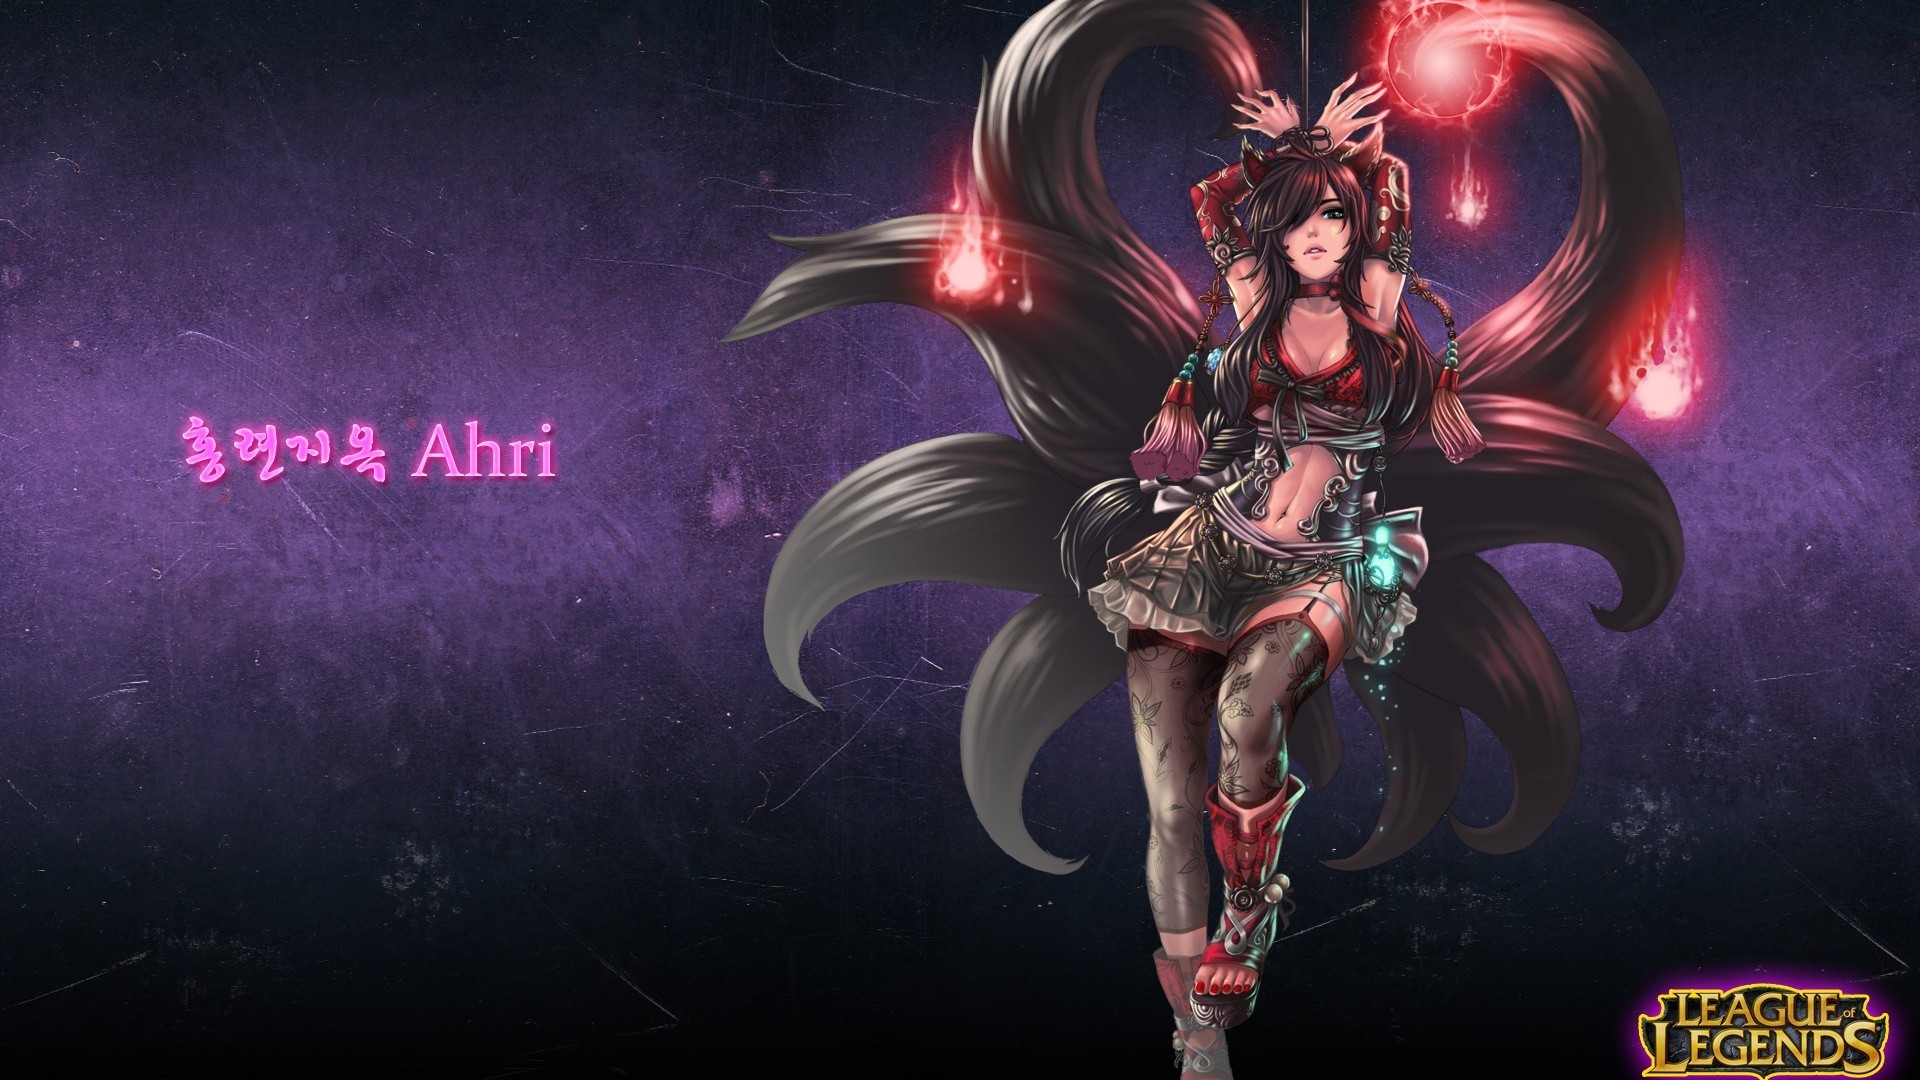 Anime 1920x1080 League of Legends Ahri (League of Legends) anime anime girls PC gaming video game girls video games belly legs long hair arms up fantasy girl